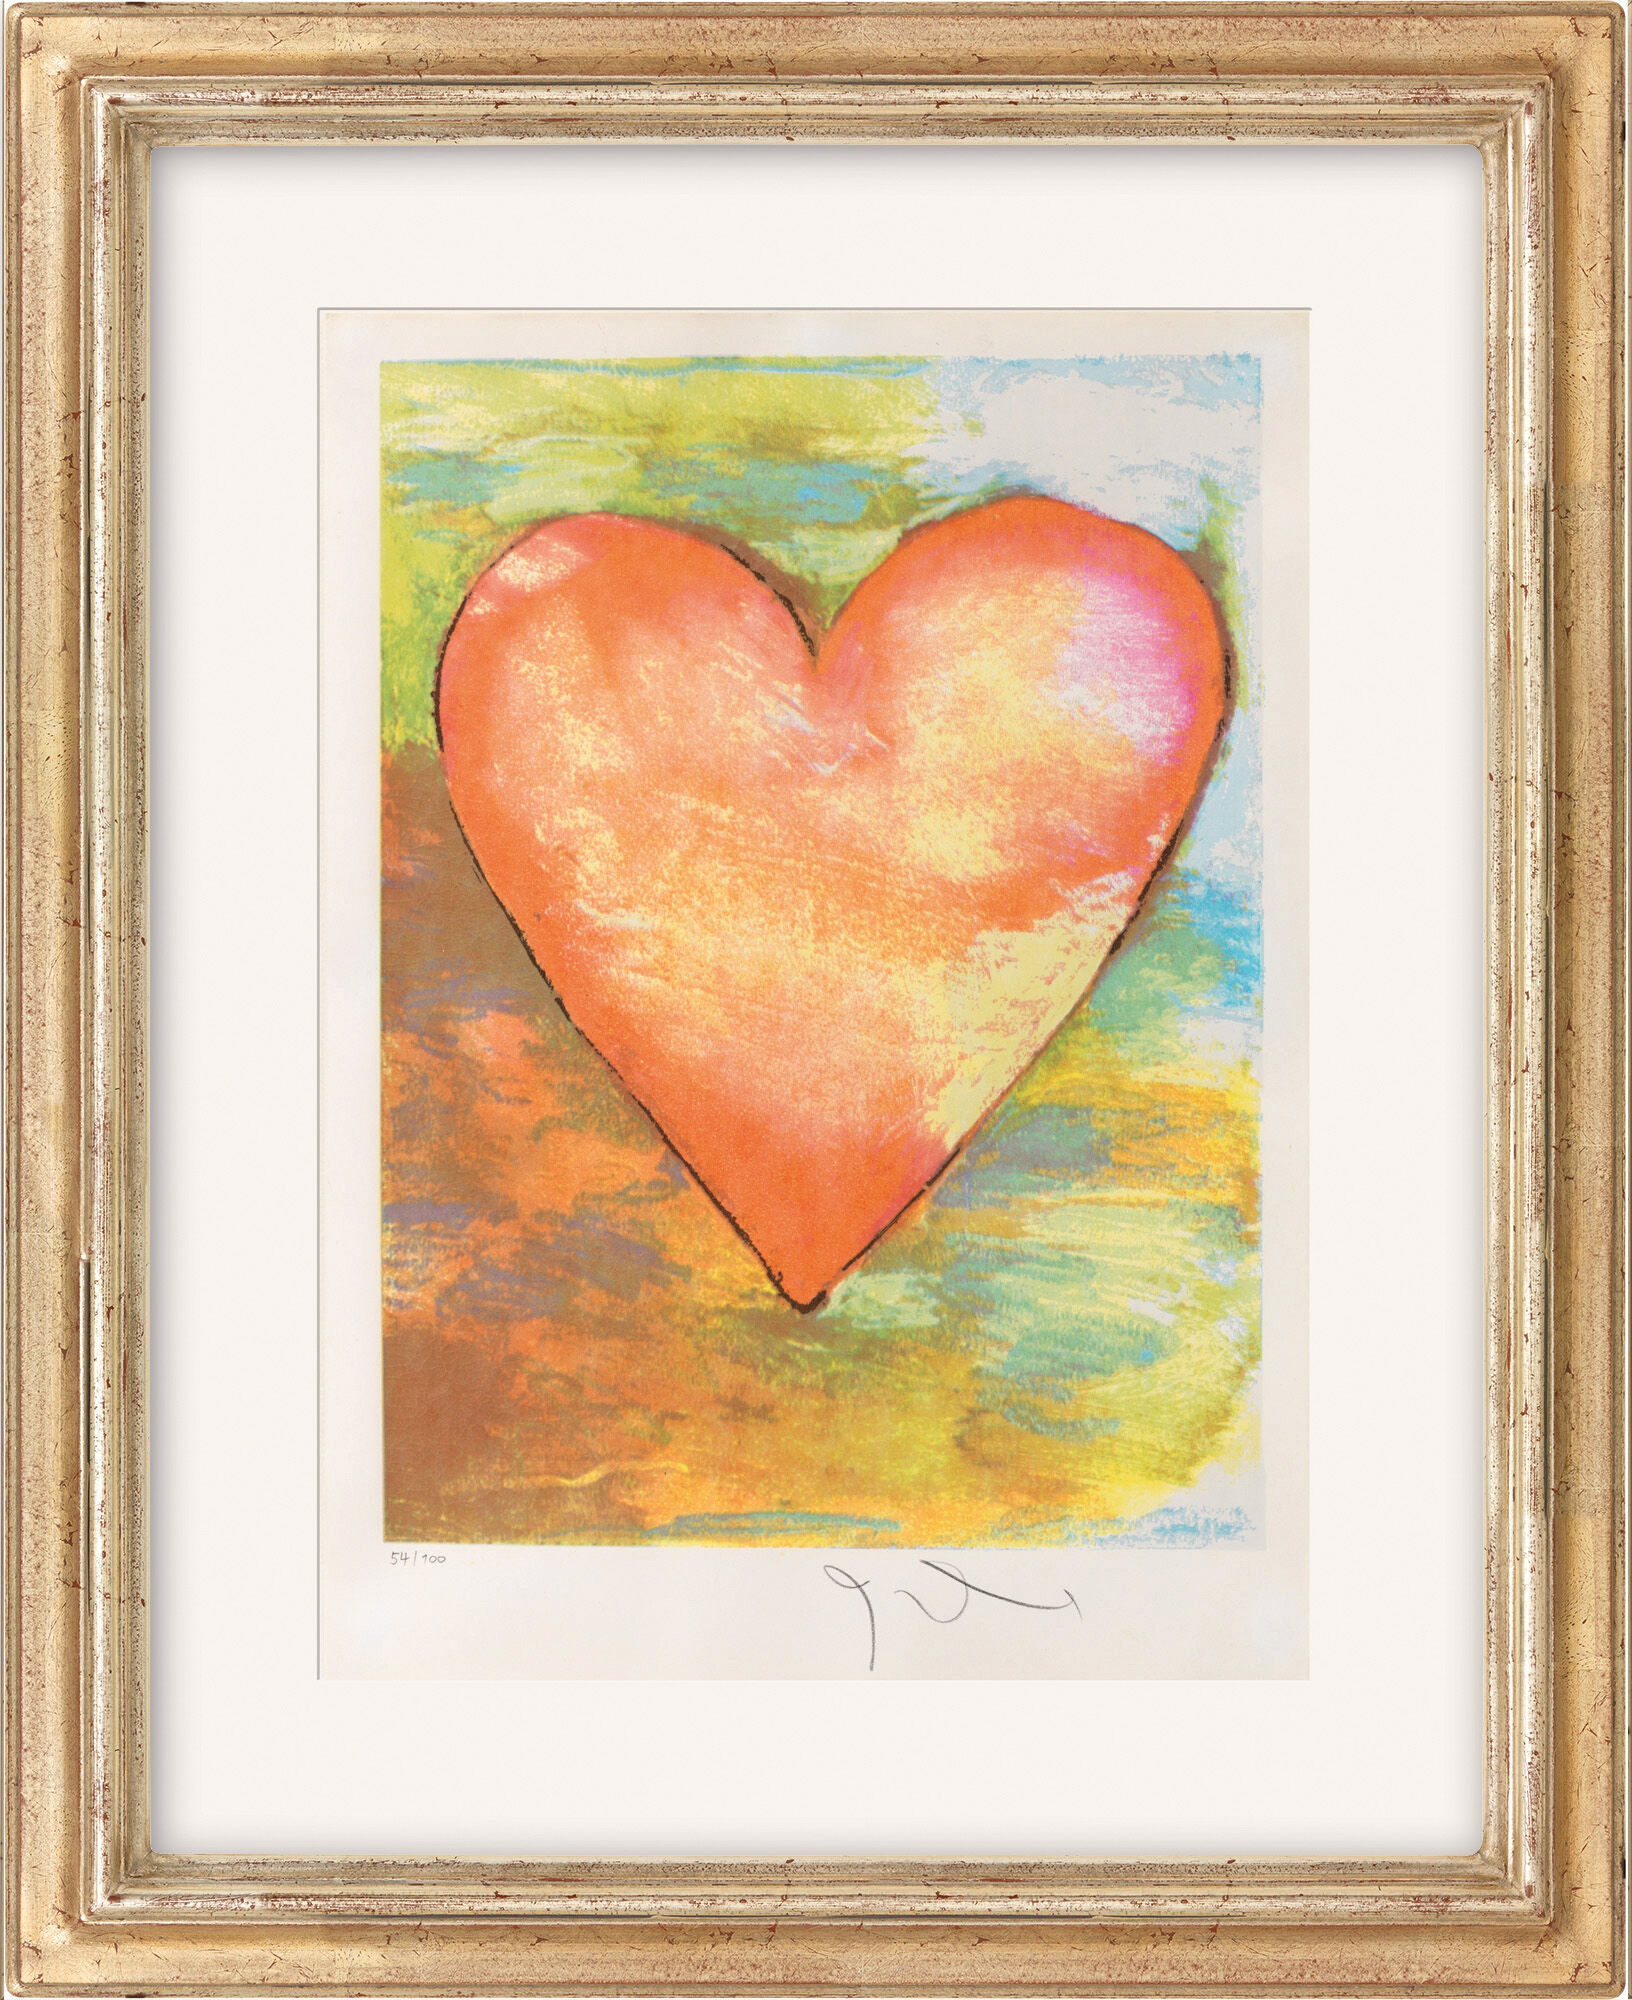 Picture "Heart" (1971) by Jim Dine